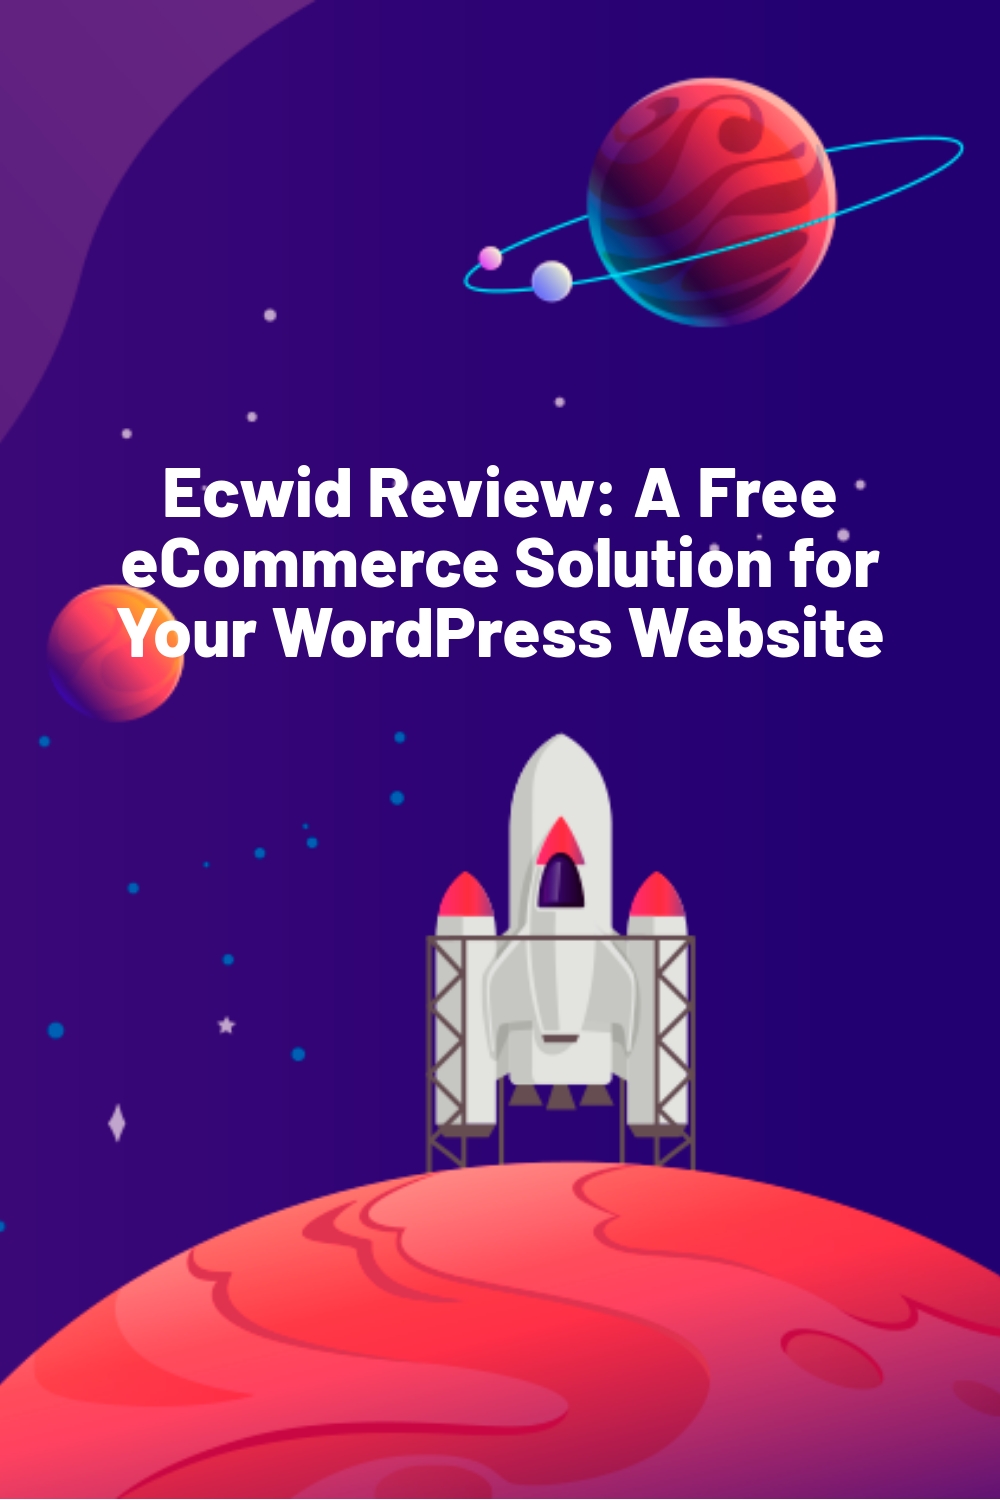 Ecwid Review: A Free eCommerce Solution for Your WordPress Website